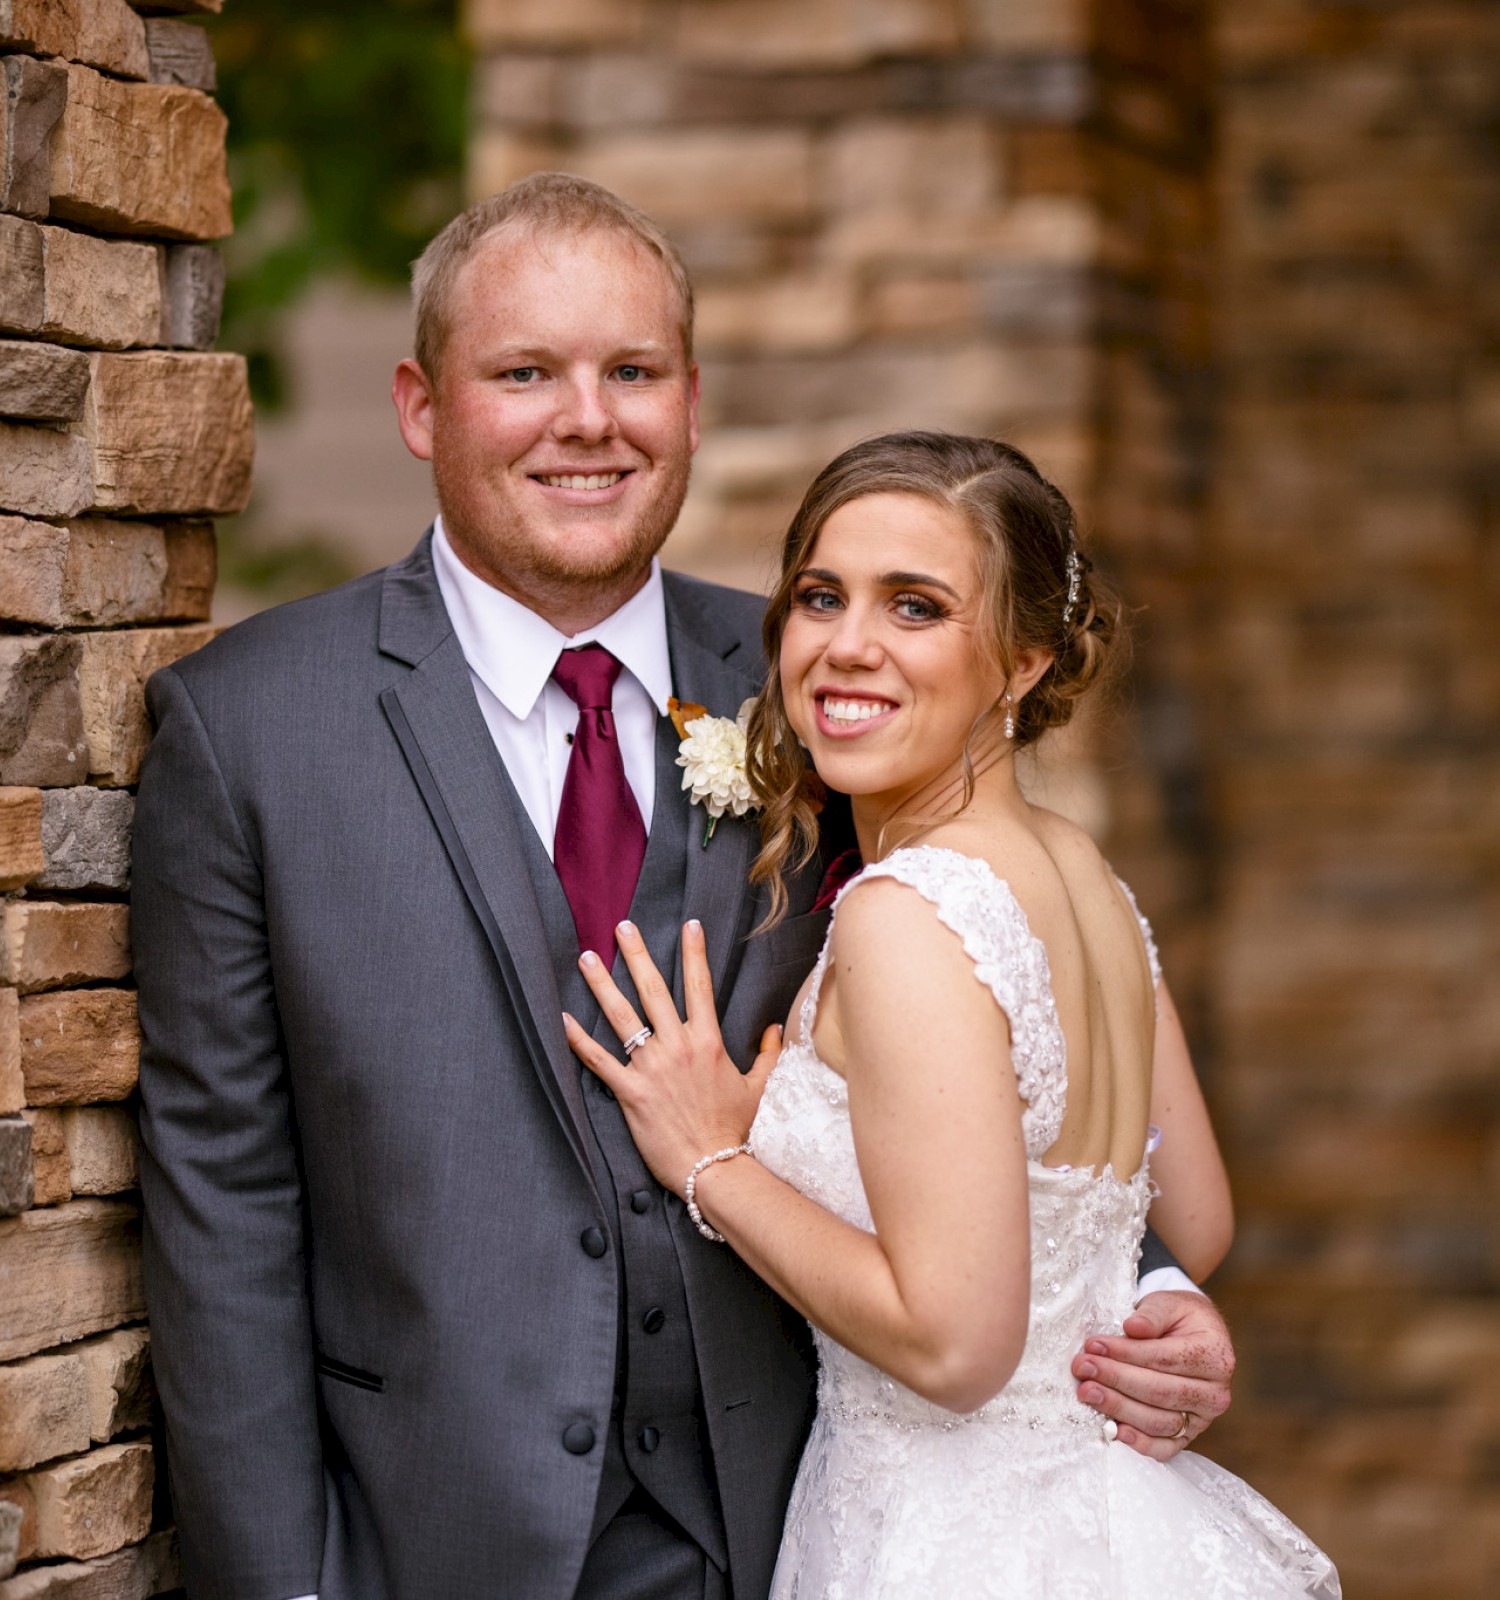 A smiling couple is standing outside, dressed in wedding attire. They are posing for a photo against a stone wall.